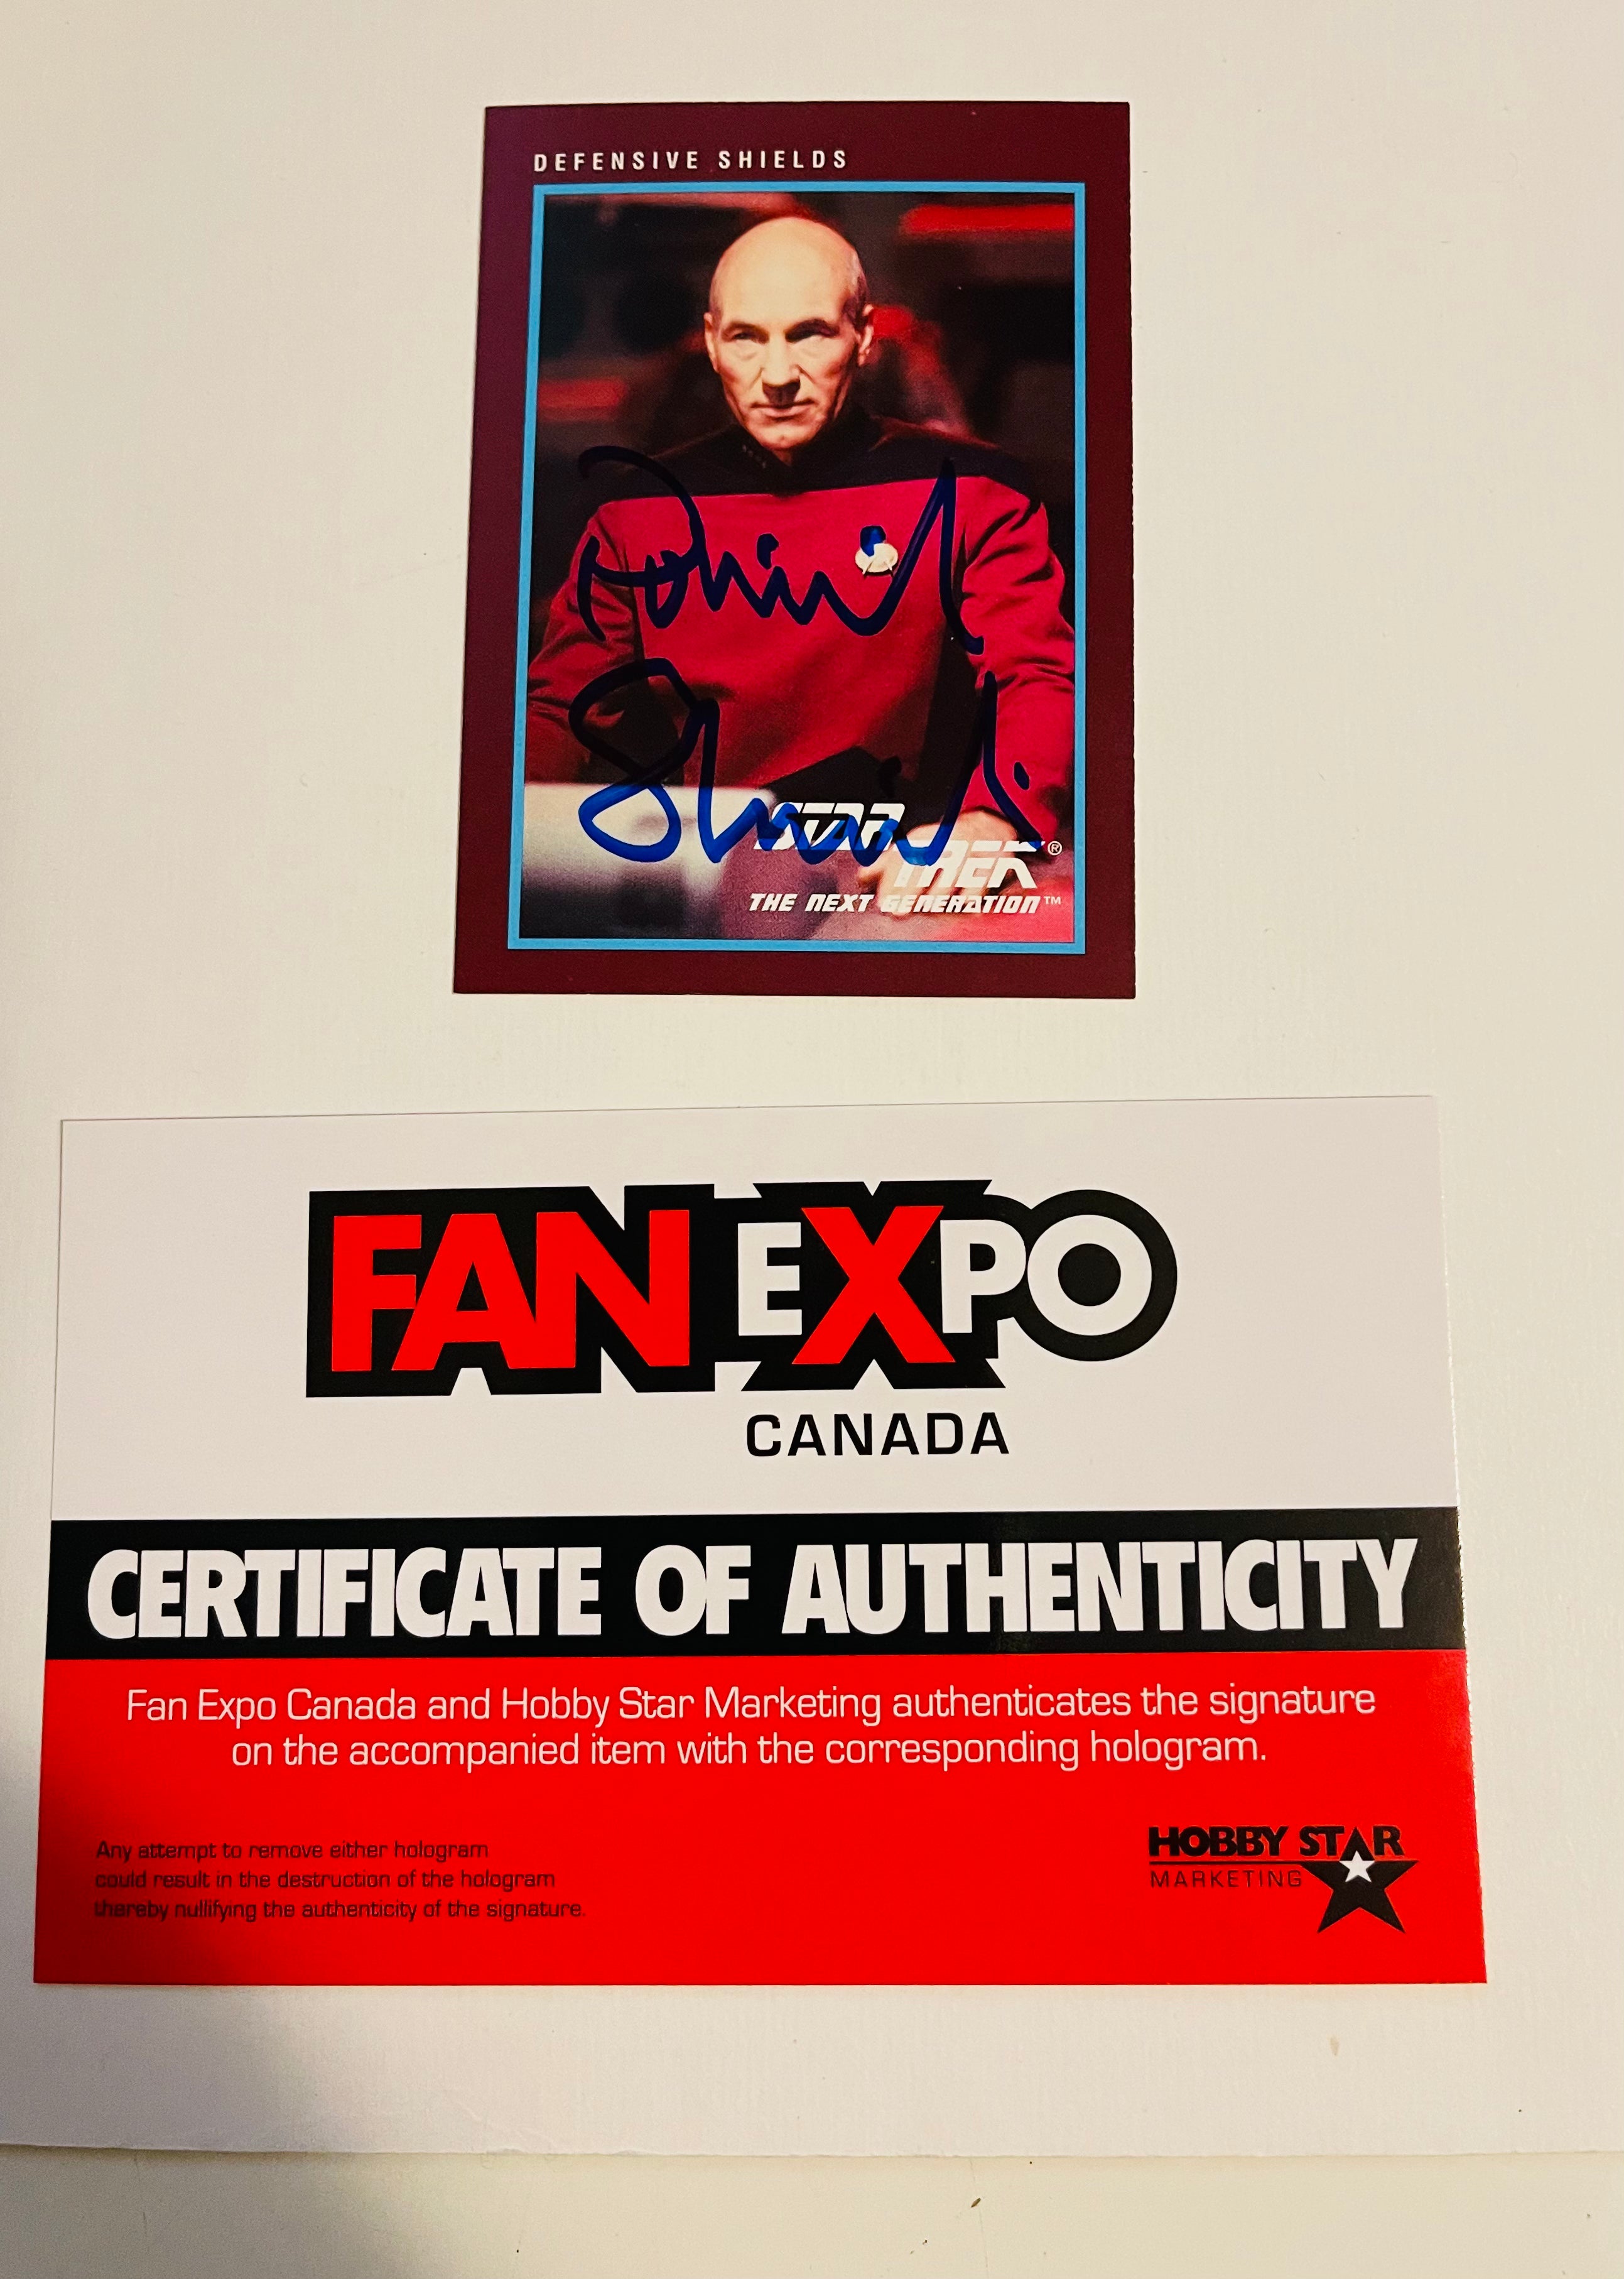 Star Trek Patrick Stewart autograph Card with Fanexpo COA and Hologram